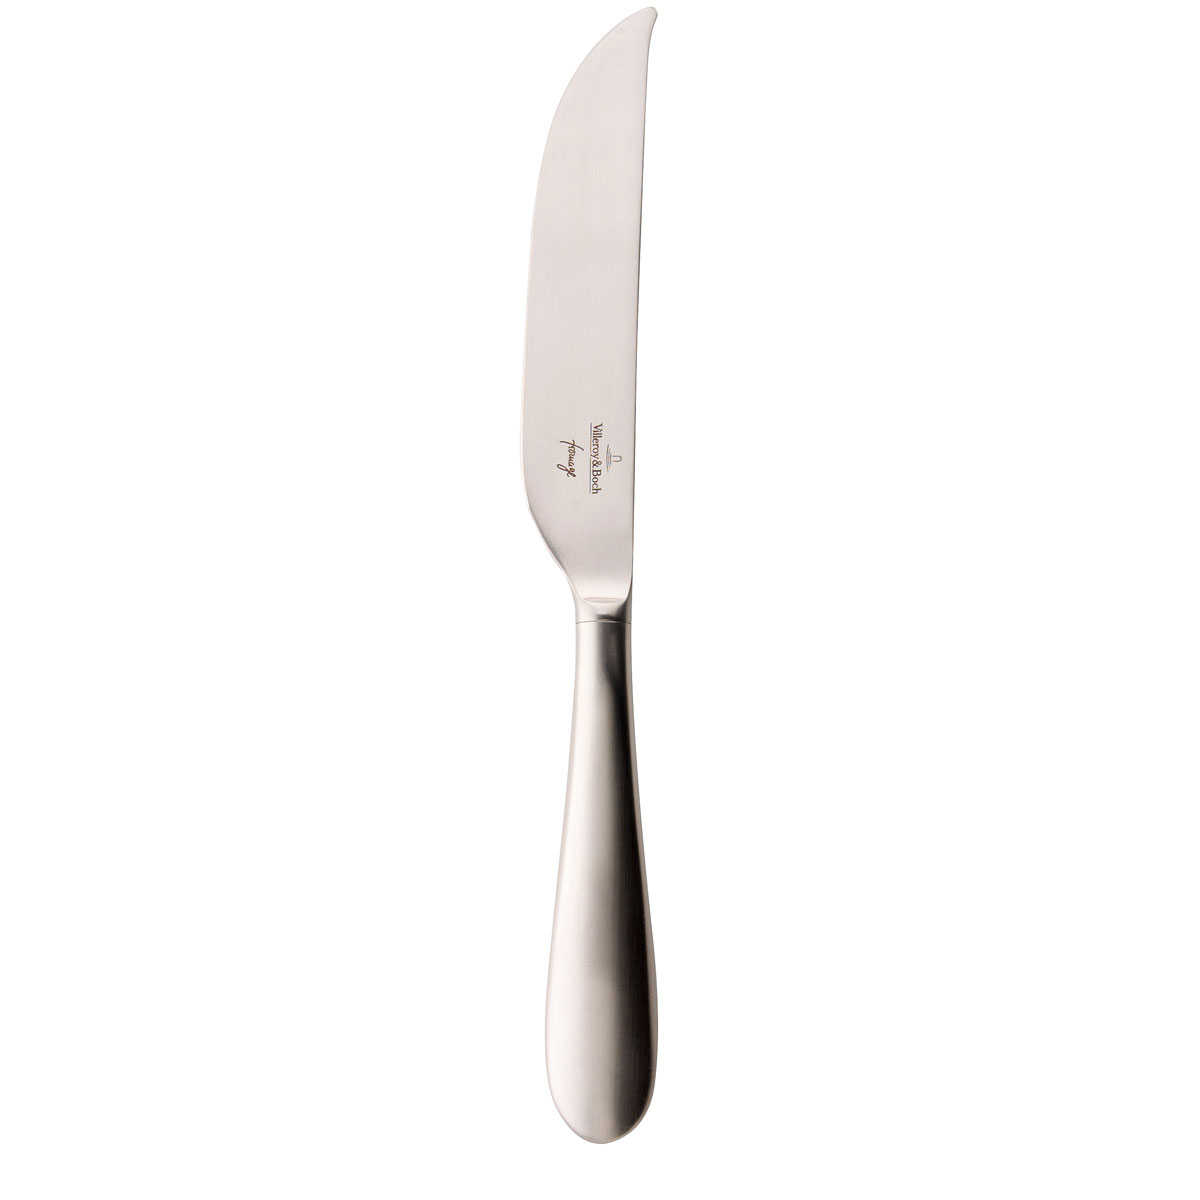 Villeroy and Boch Flatware Kensington Fromage Hard Cheese Knife, Single